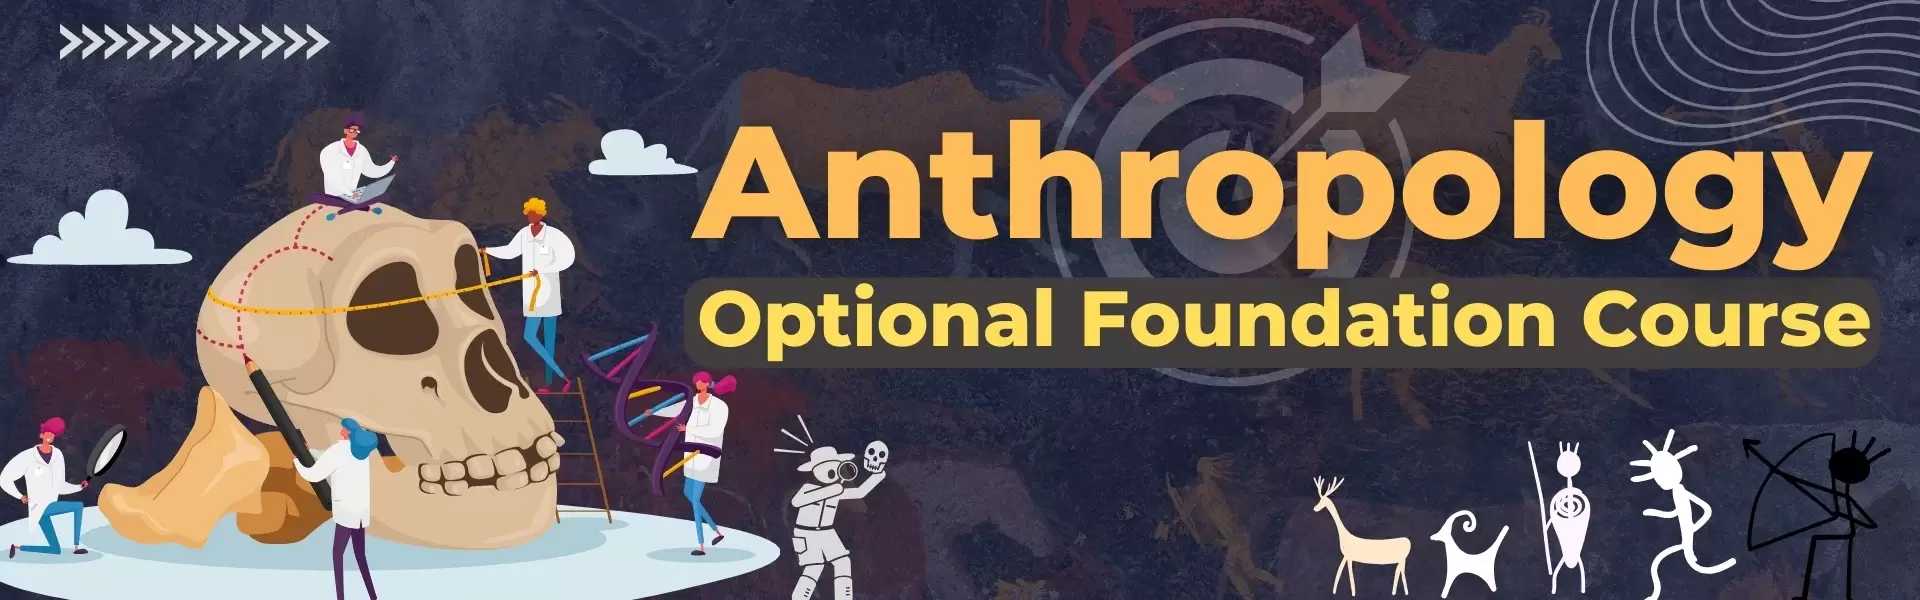 Anthropology Optional Foundation Course